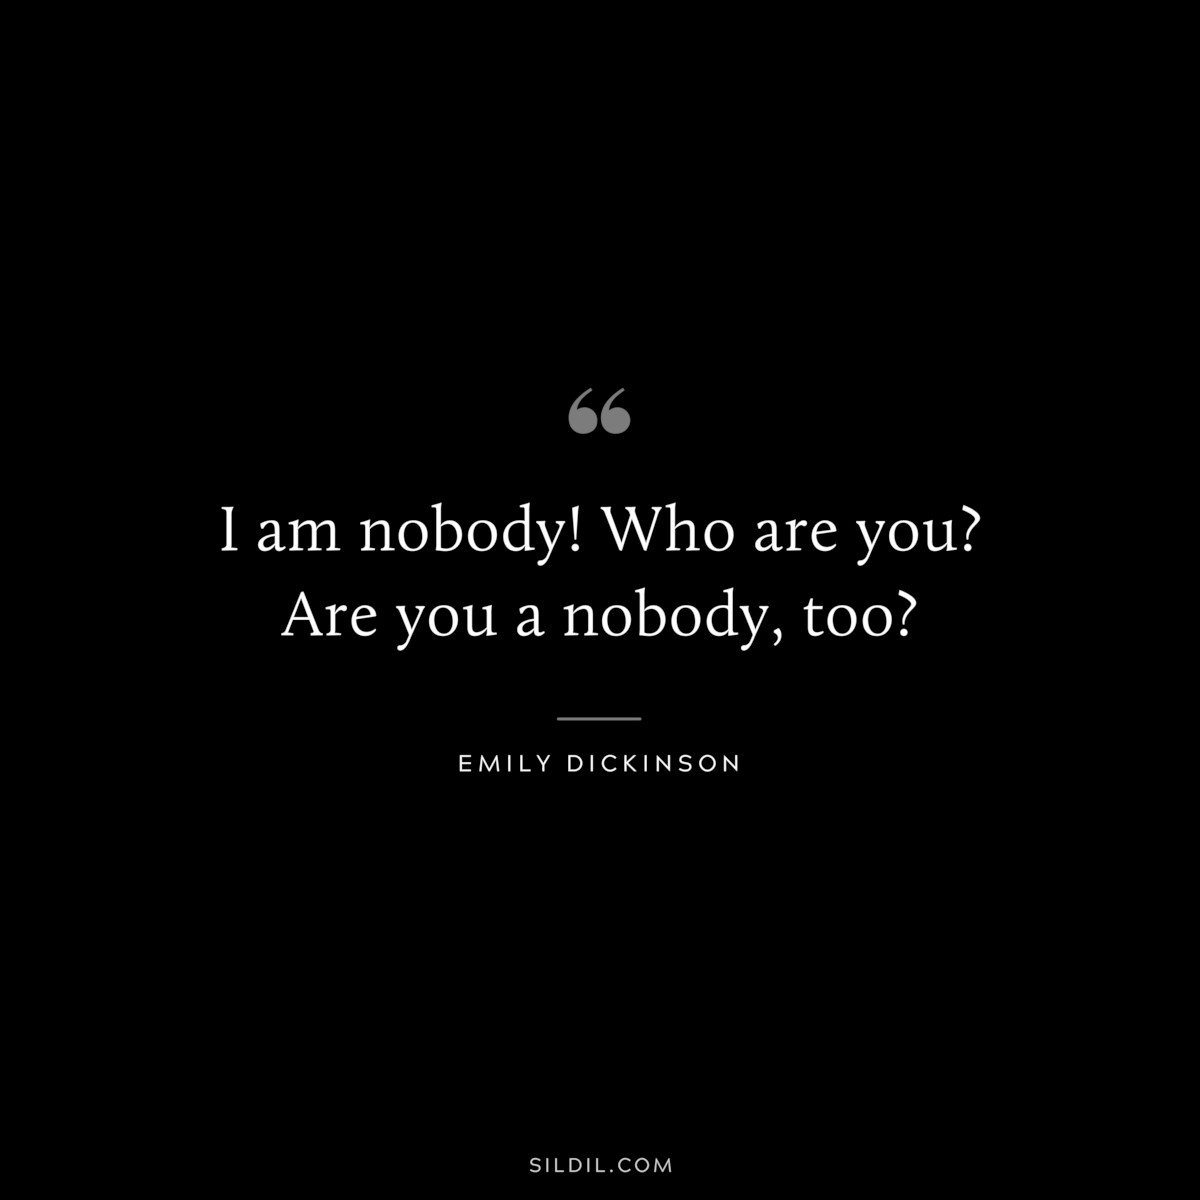 I am nobody! Who are you? Are you a nobody, too?